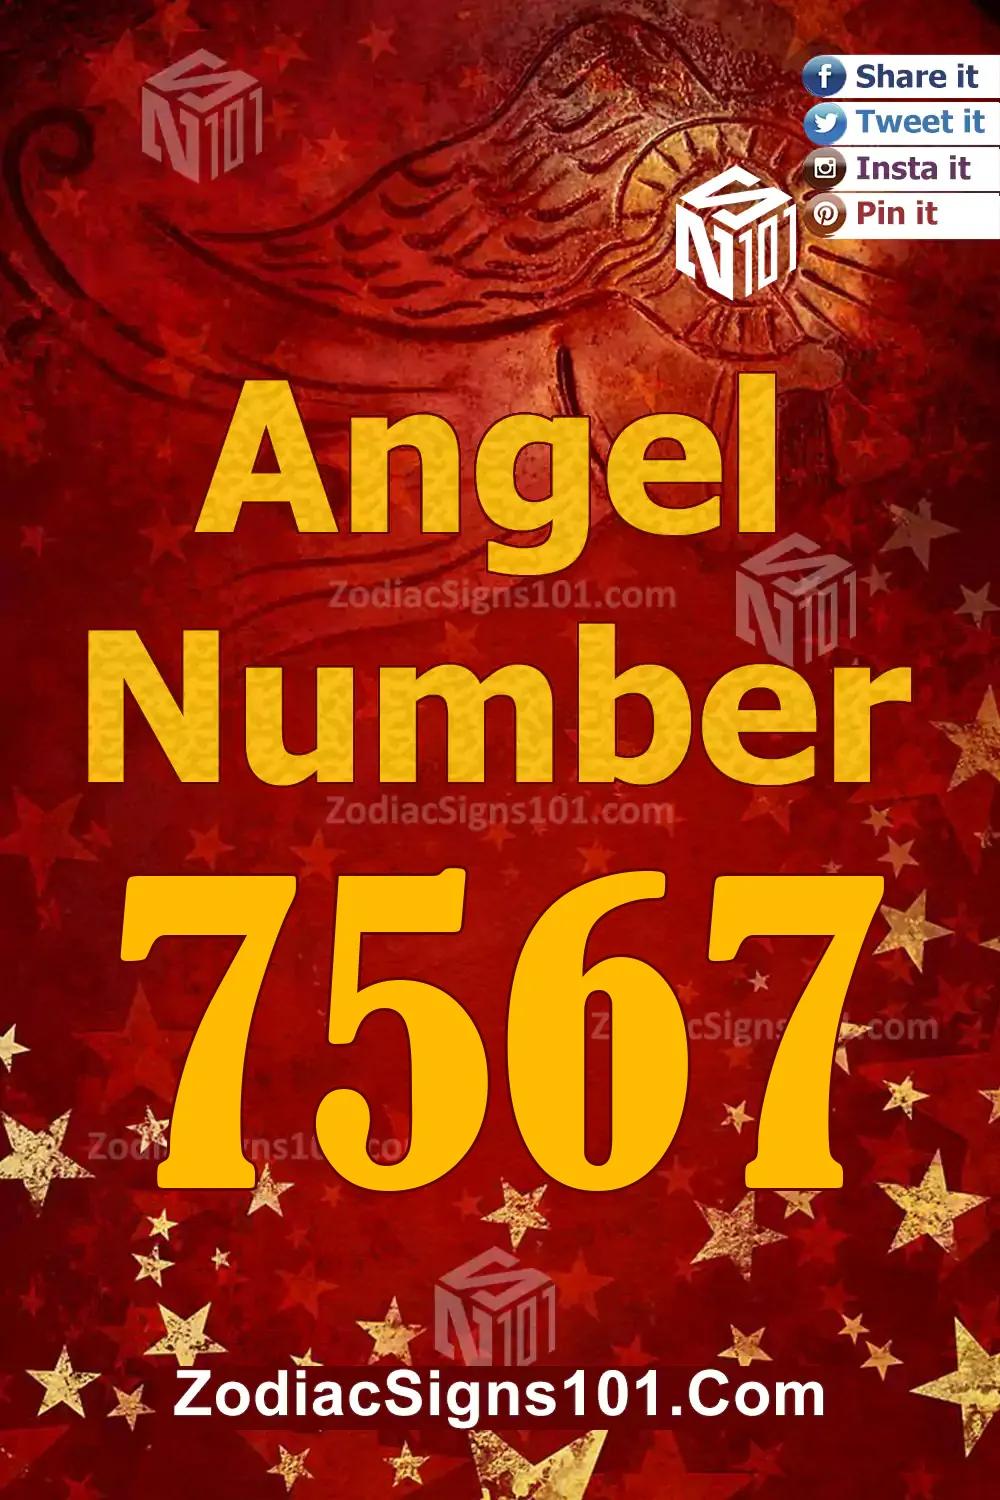 7567 Angel Number Meaning